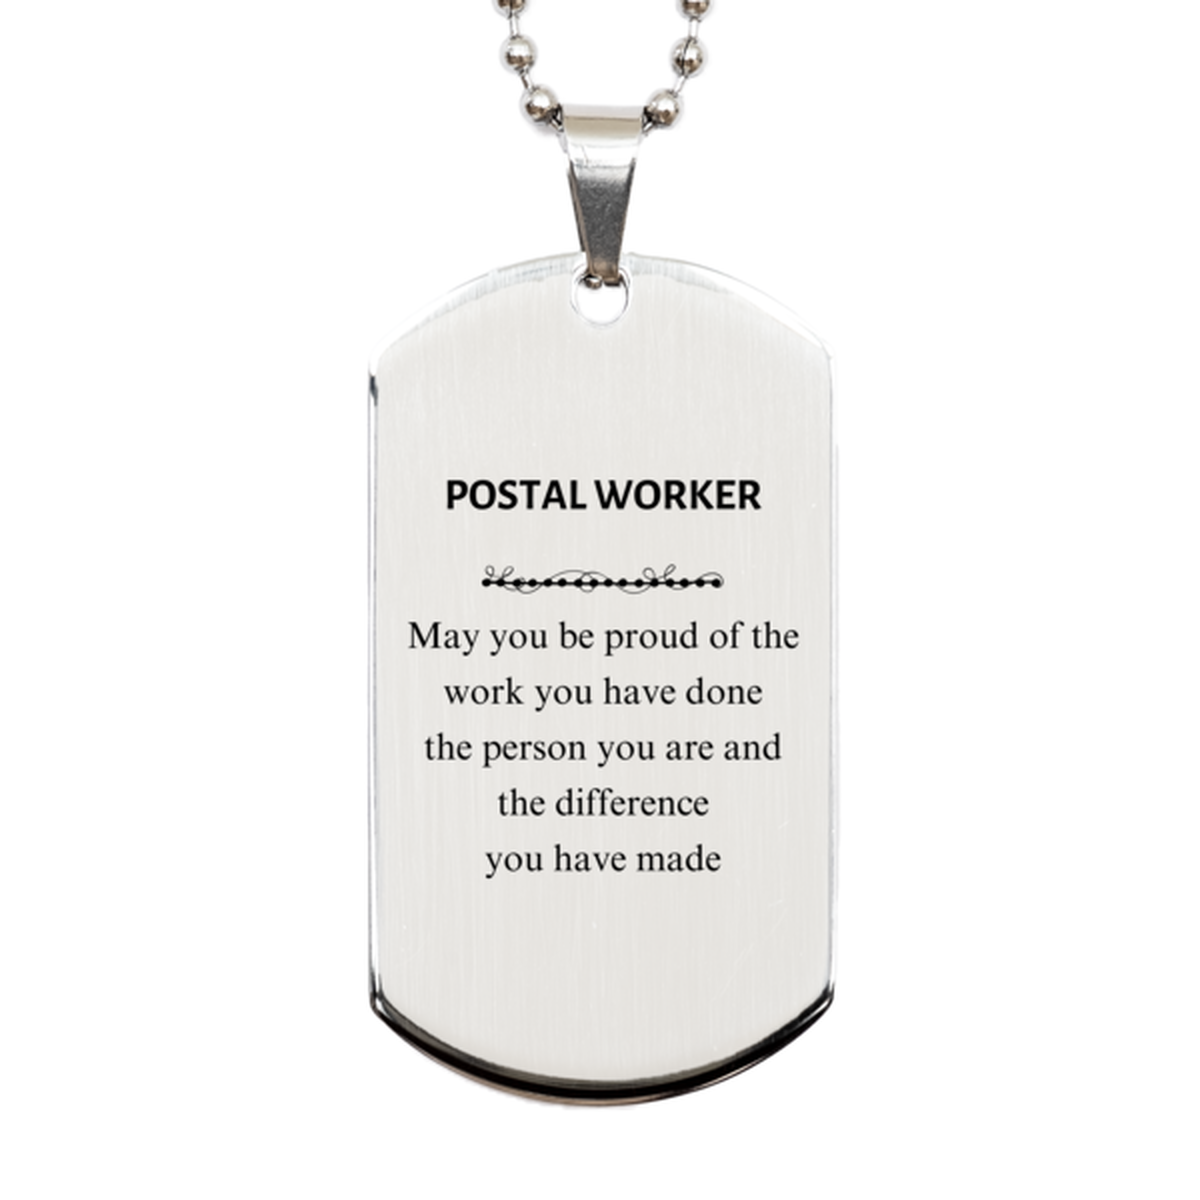 Postal Worker May you be proud of the work you have done, Retirement Postal Worker Silver Dog Tag for Colleague Appreciation Gifts Amazing for Postal Worker